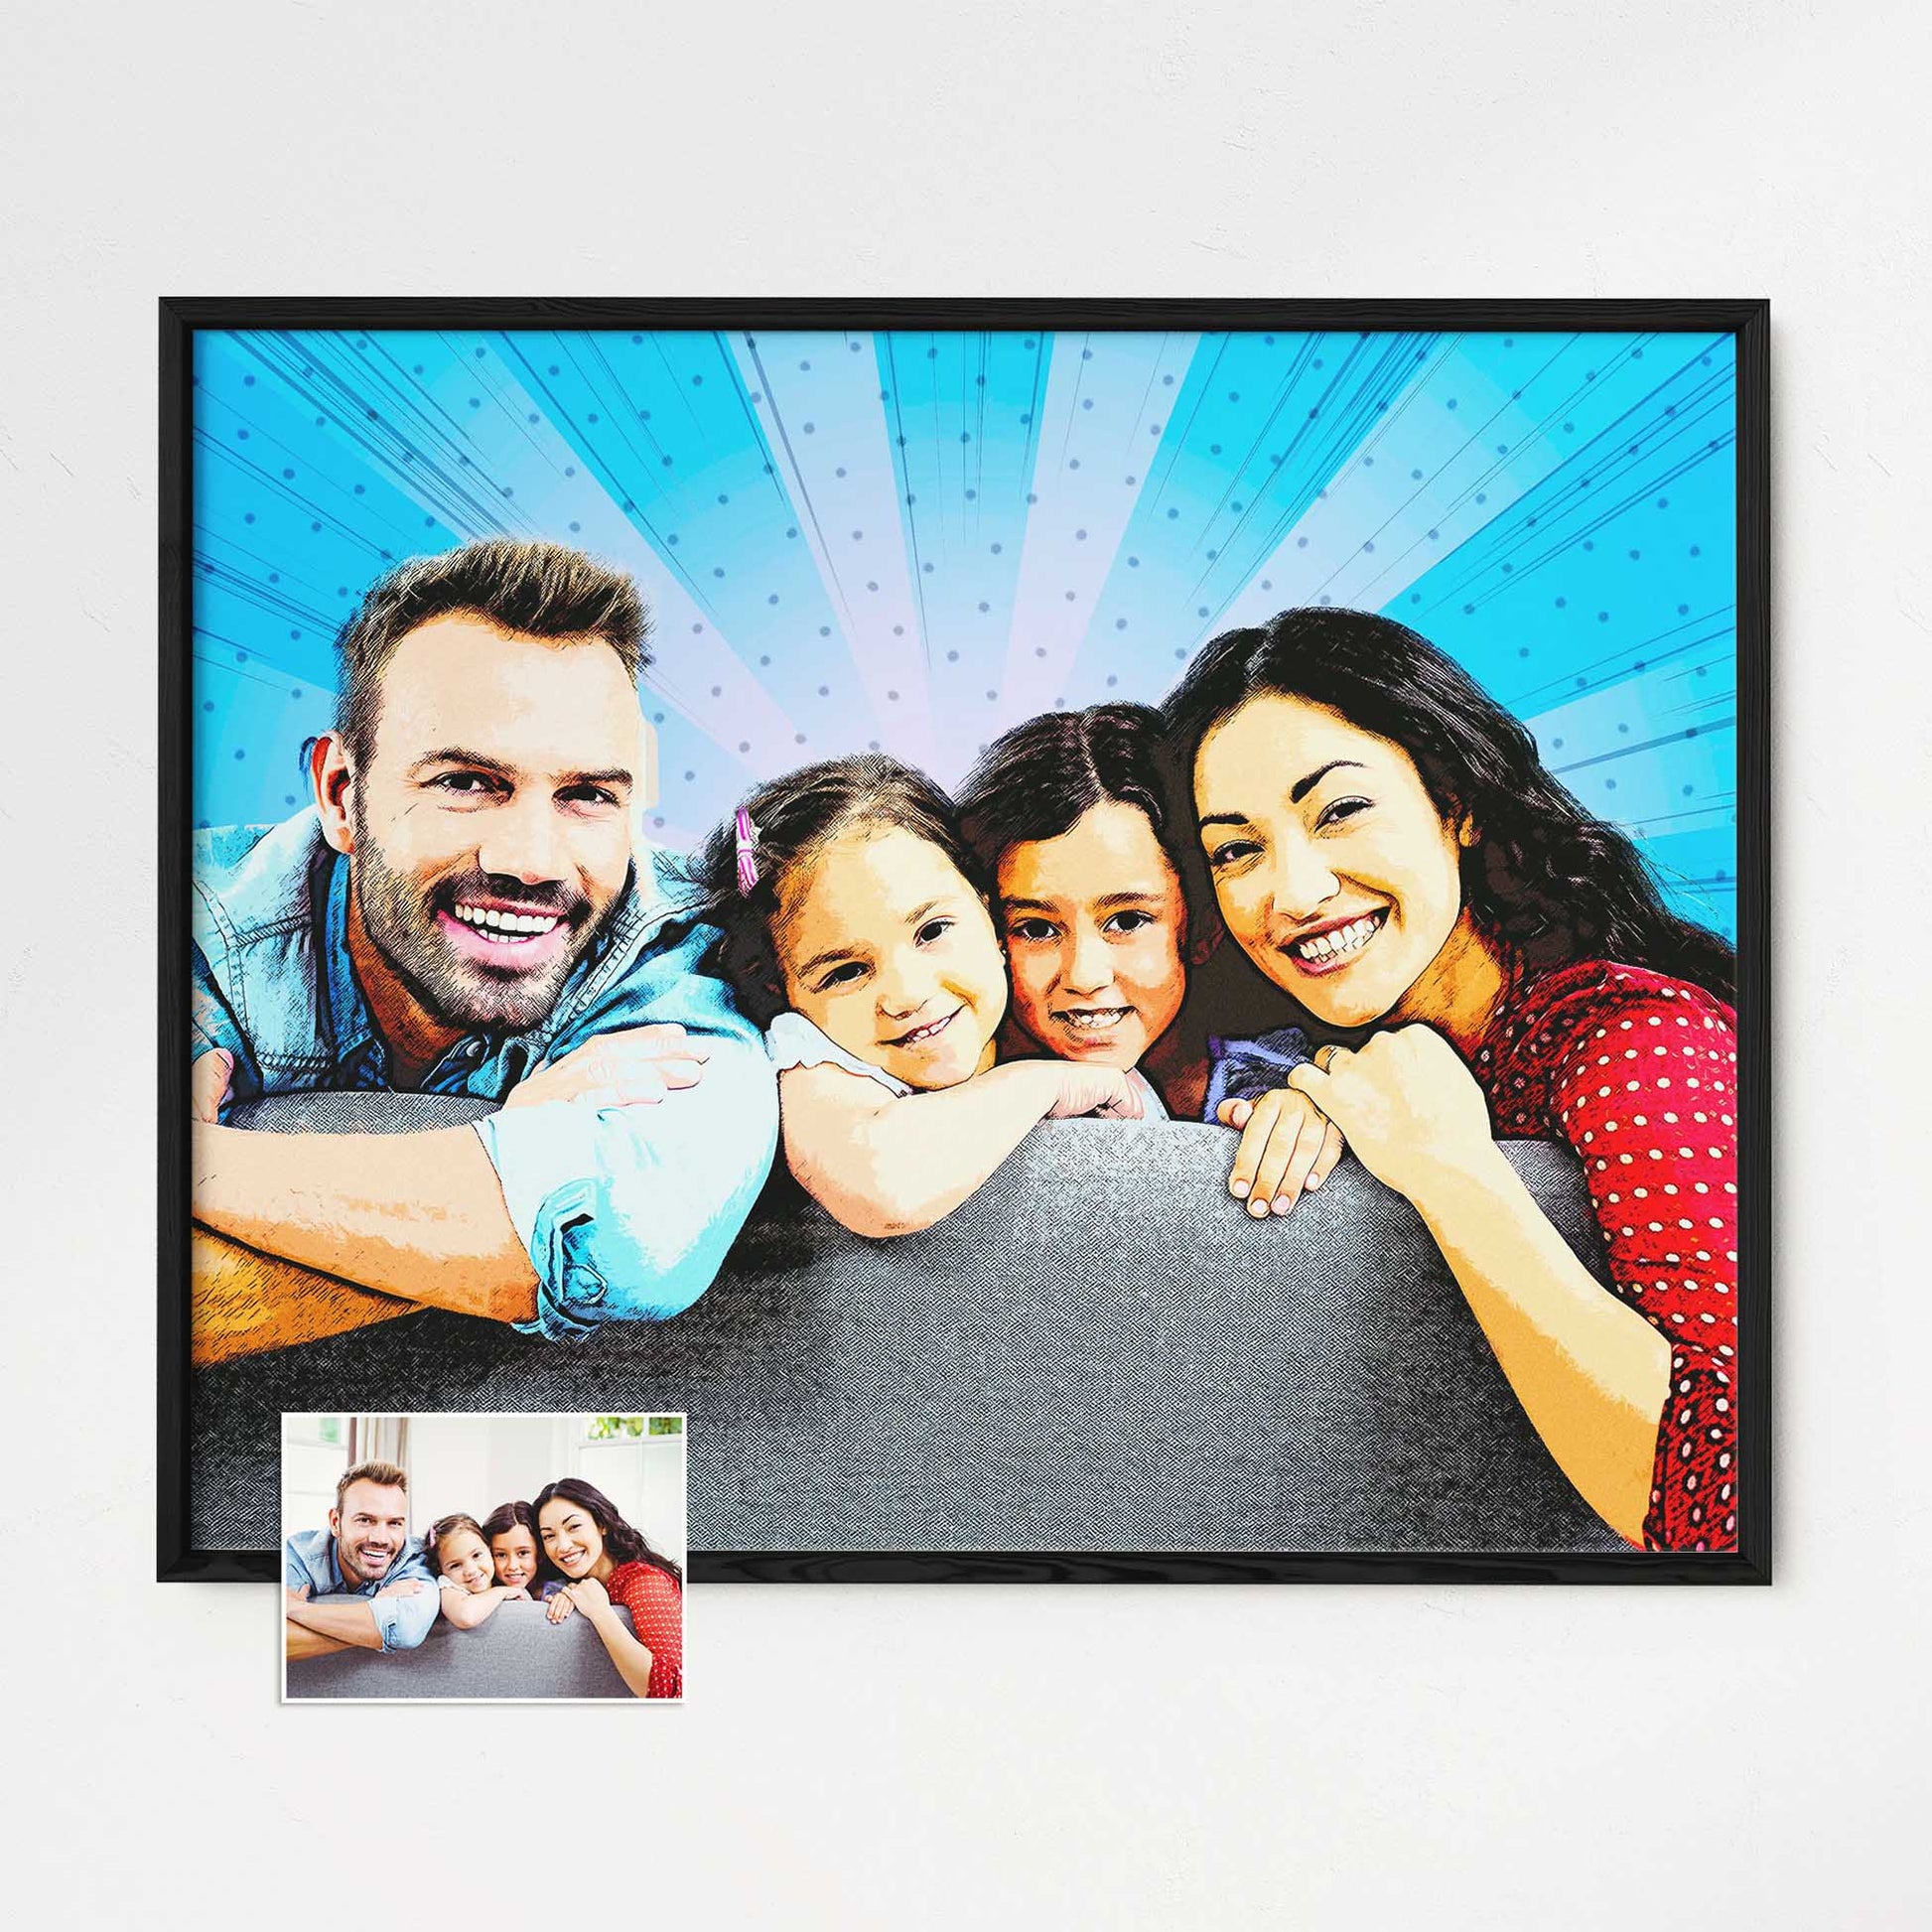 Experience the joy and creativity of our Personalised Blue & Yellow Cartoon Framed Print. This artwork, transformed from your photo into a cartoon, showcases a halftone effect reminiscent of old school comics